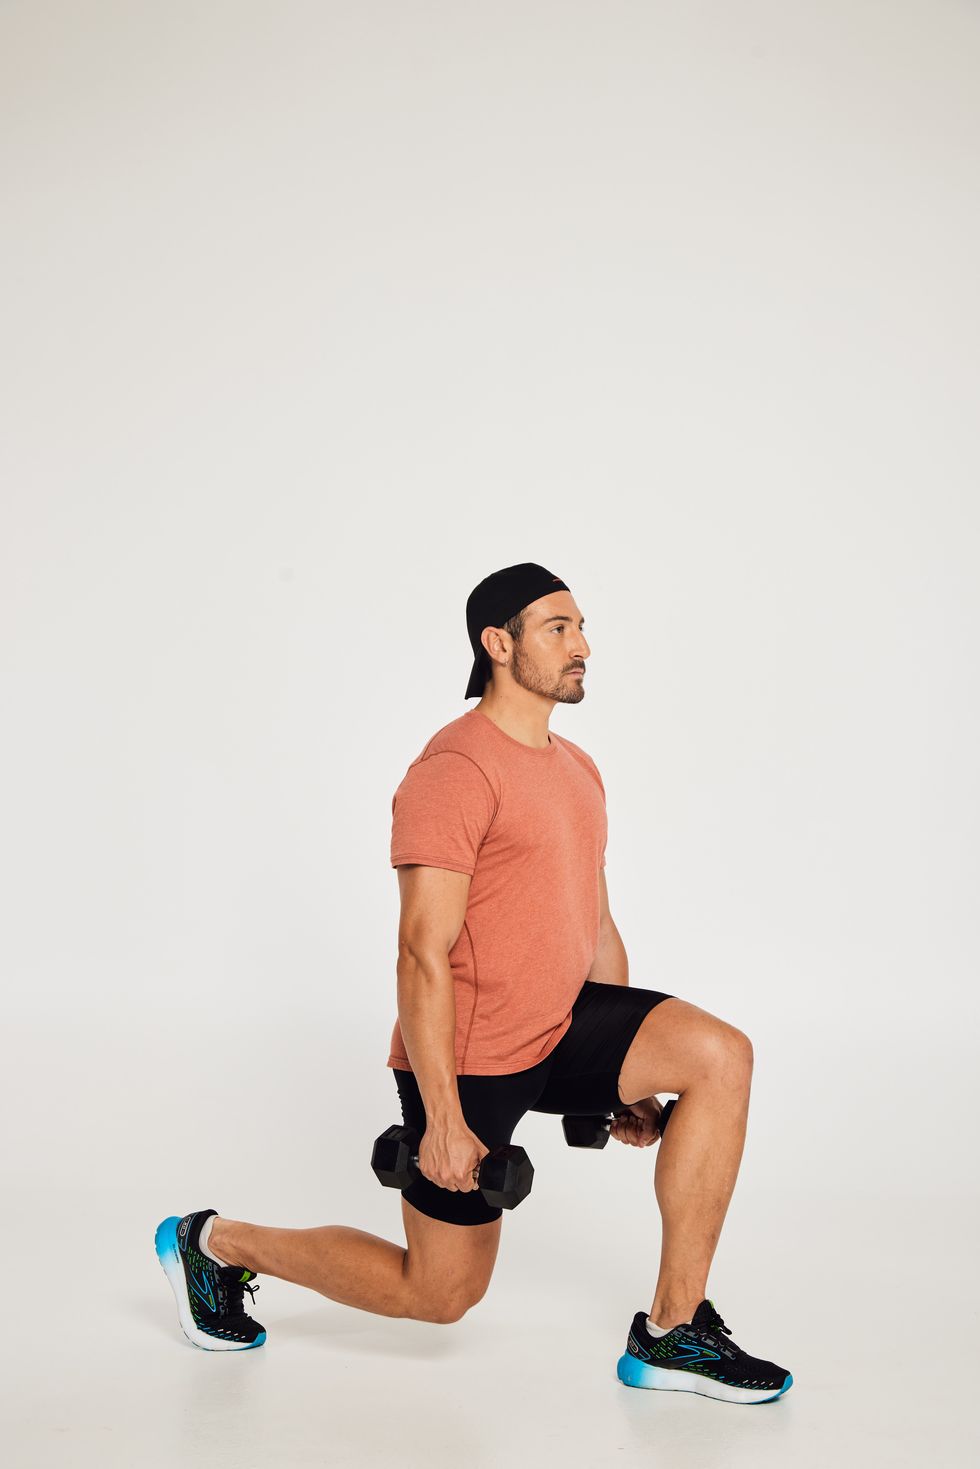 Dumbbell Lunge Exercises